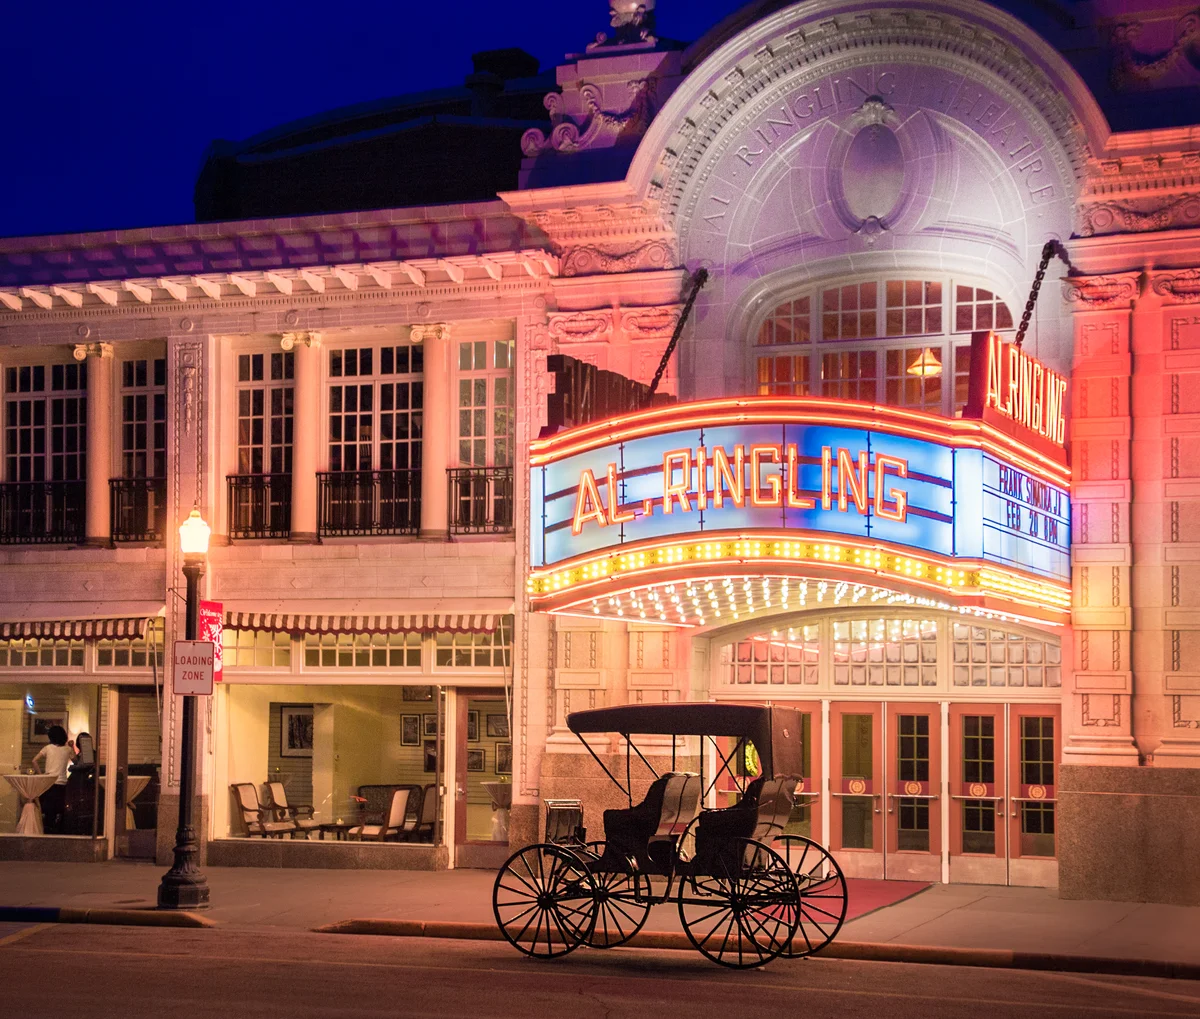 exterior view of movie theater with antique stage coach parked in front